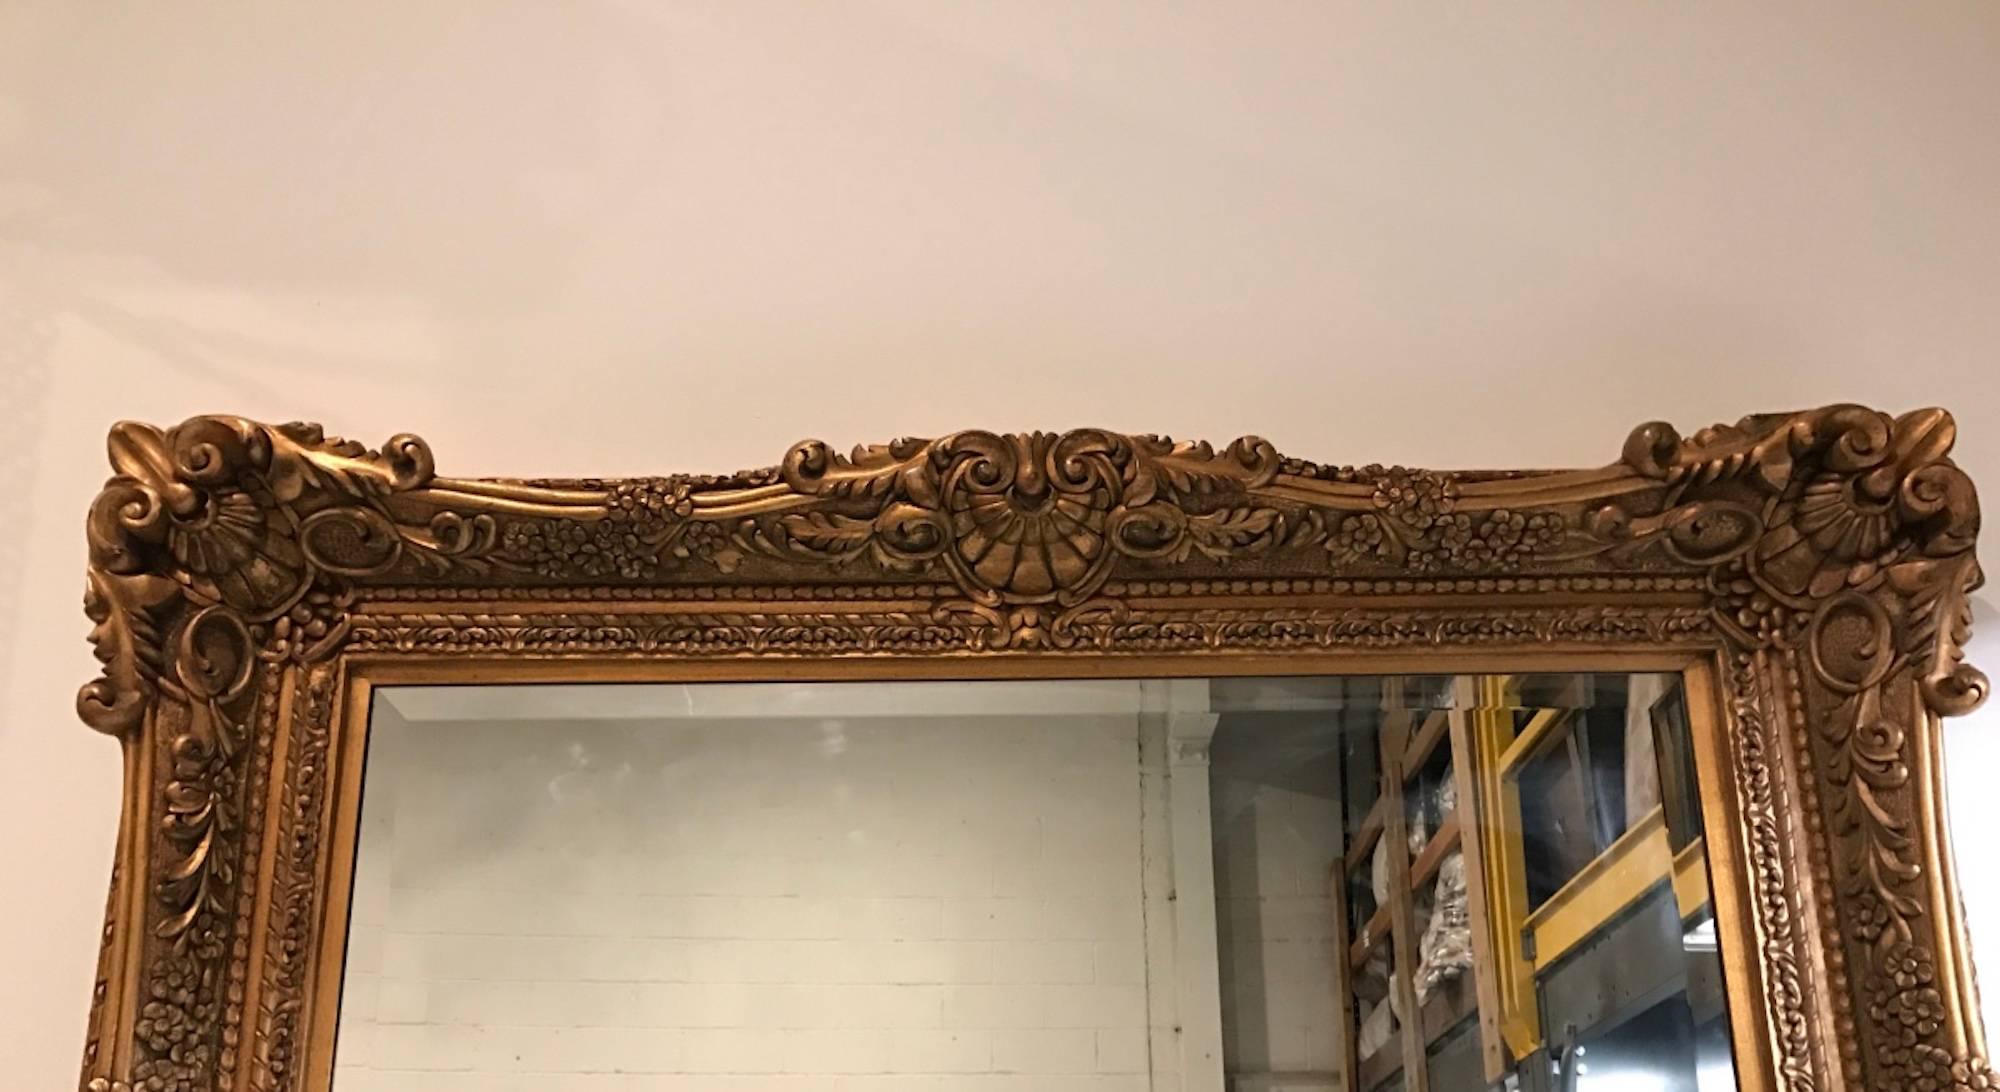 Large grand giltwood mirror with hand carved ornate details. Having beveled mirror.